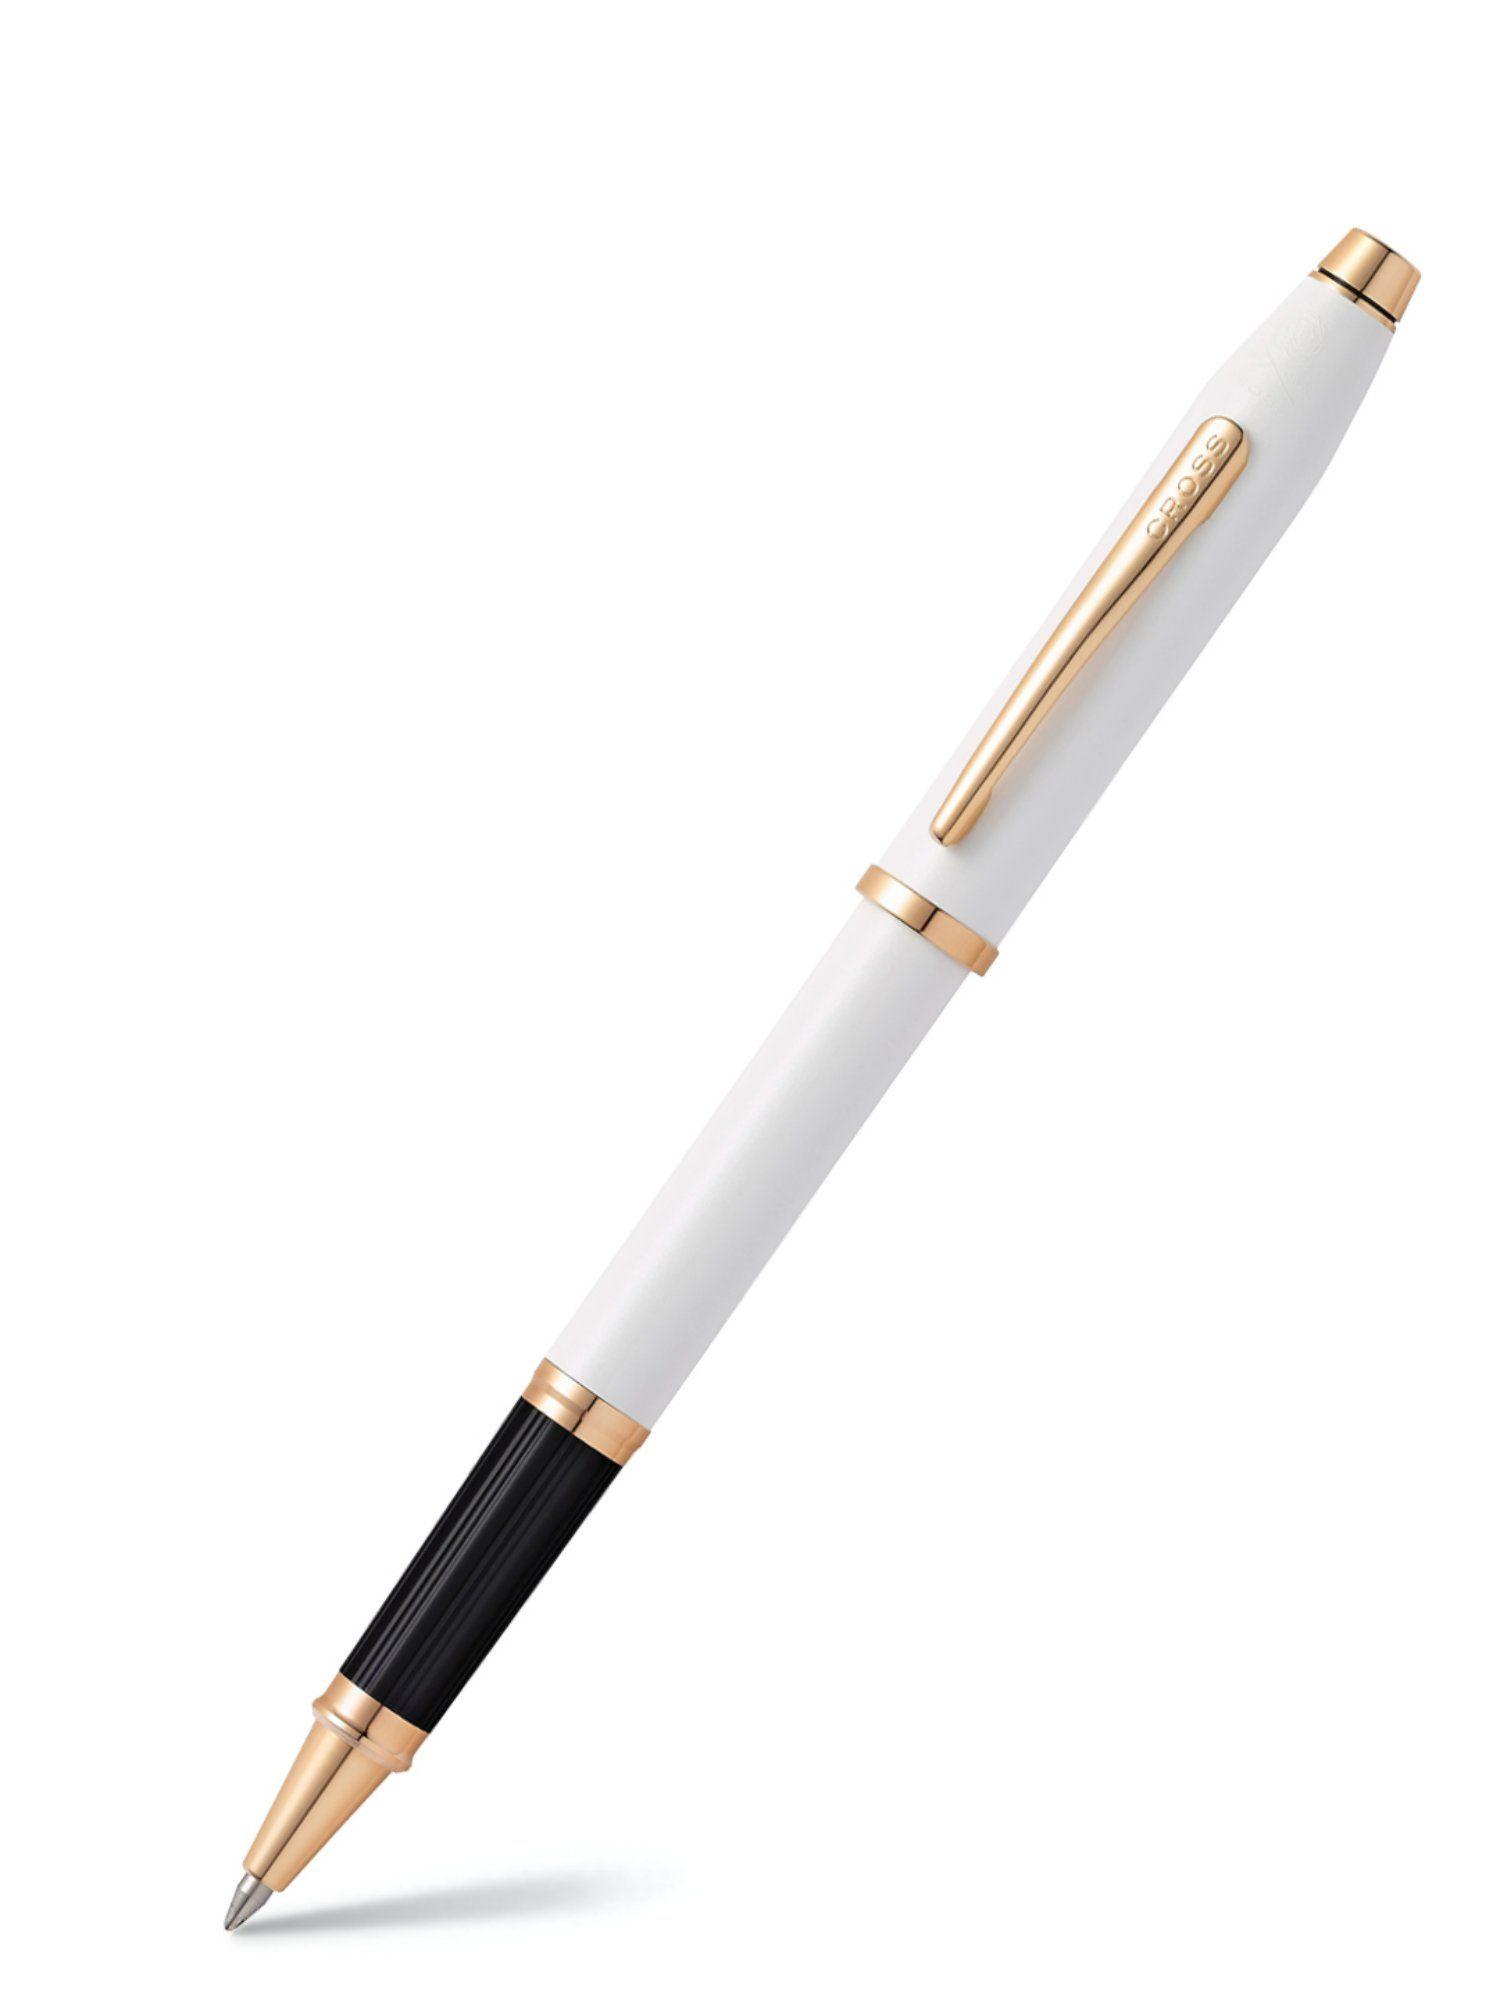 at0085-113 century ii pearlescent white lacquer rollerball pen